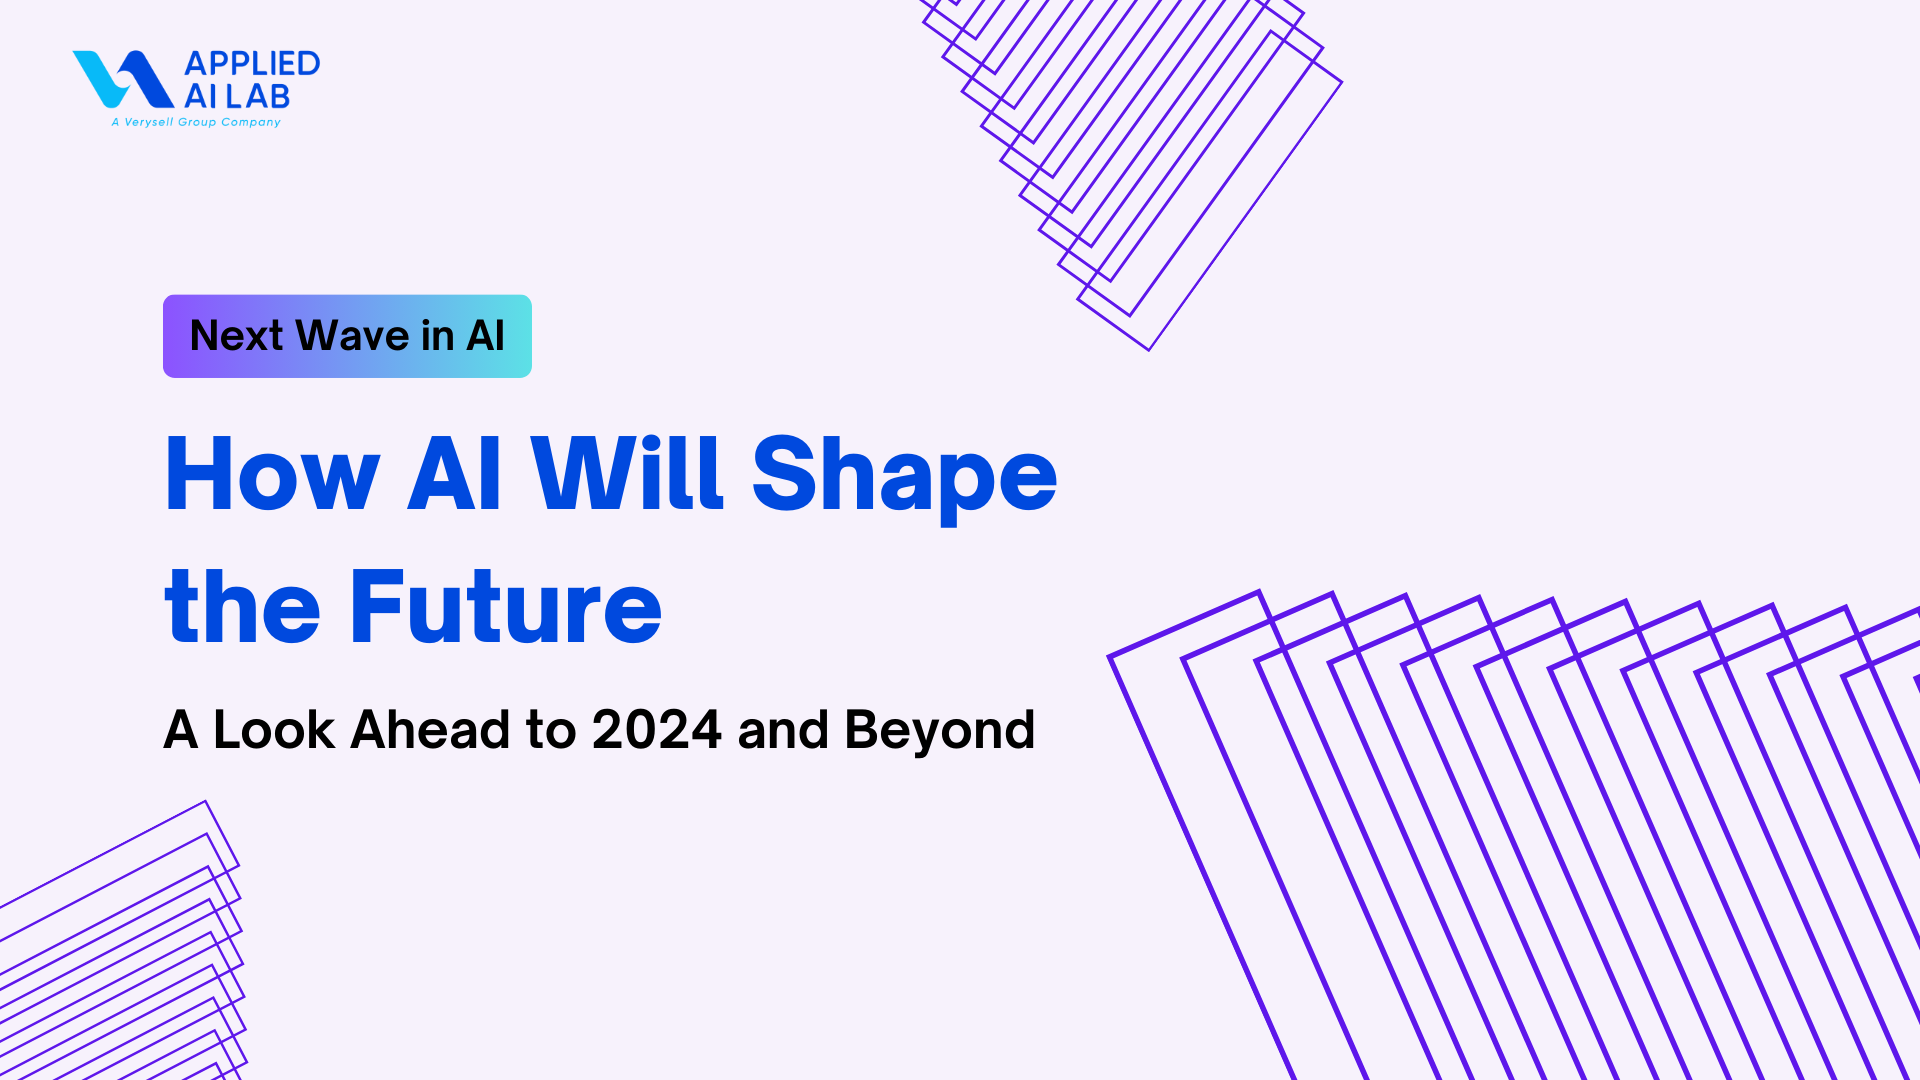 How AI Will Shape the Future - A Look Ahead to 2024 and Beyond.